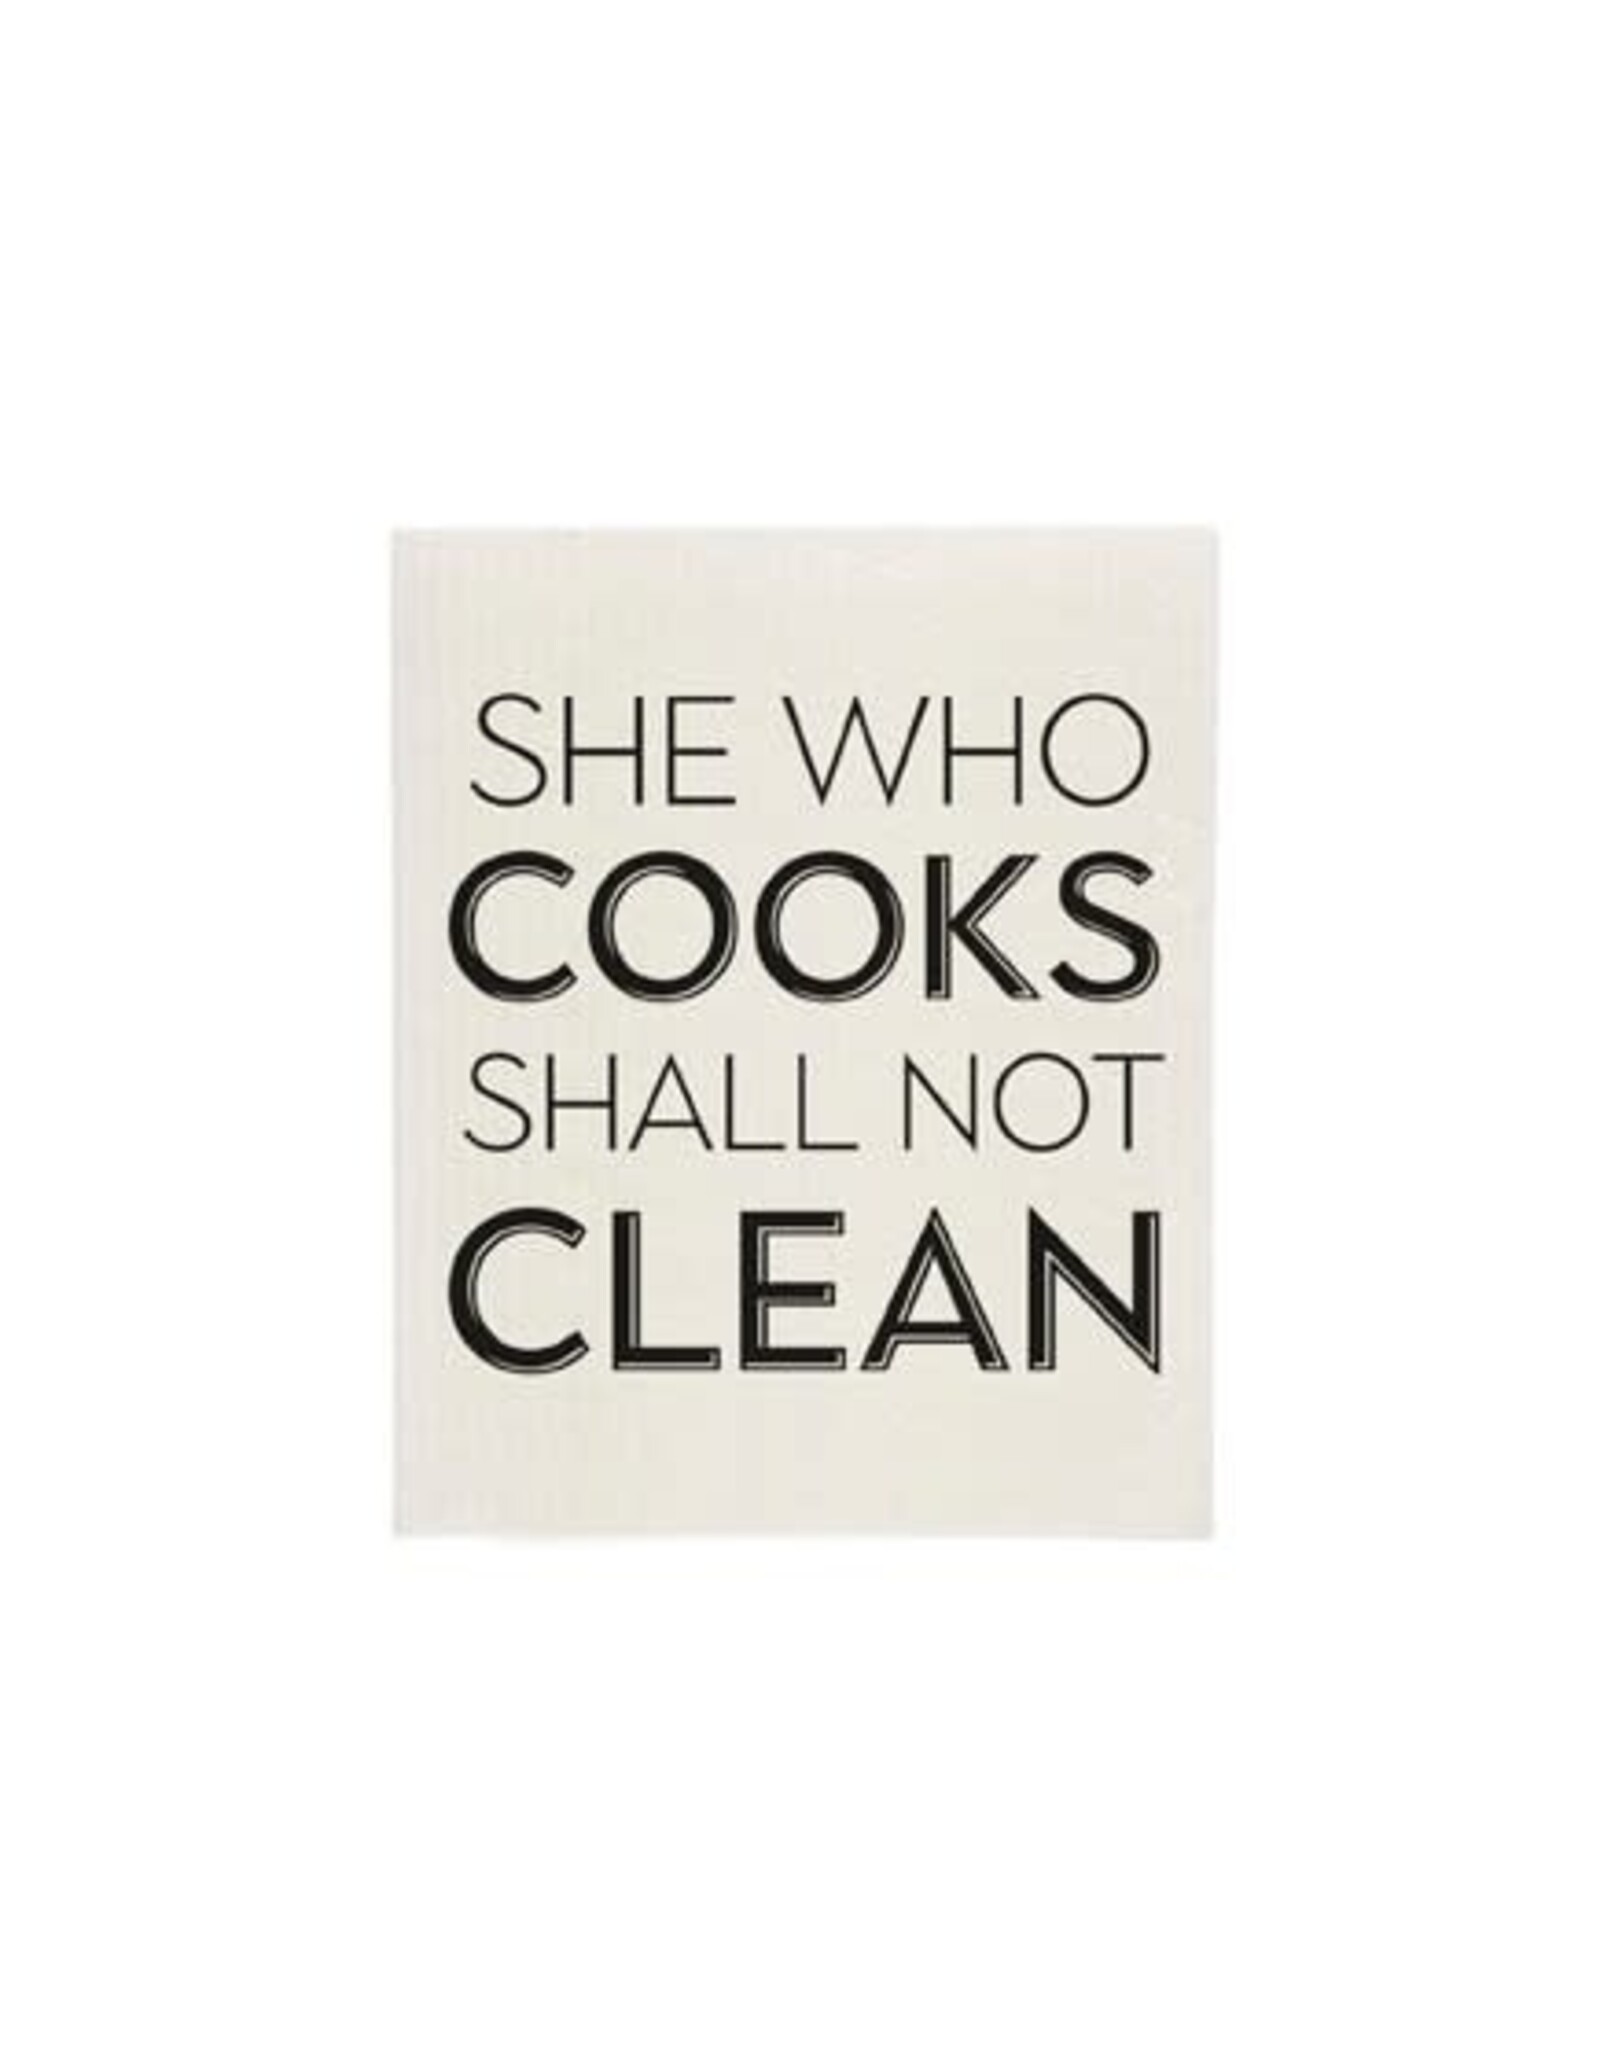 She Who Cooks Shall Not Clean Sponge Cloth